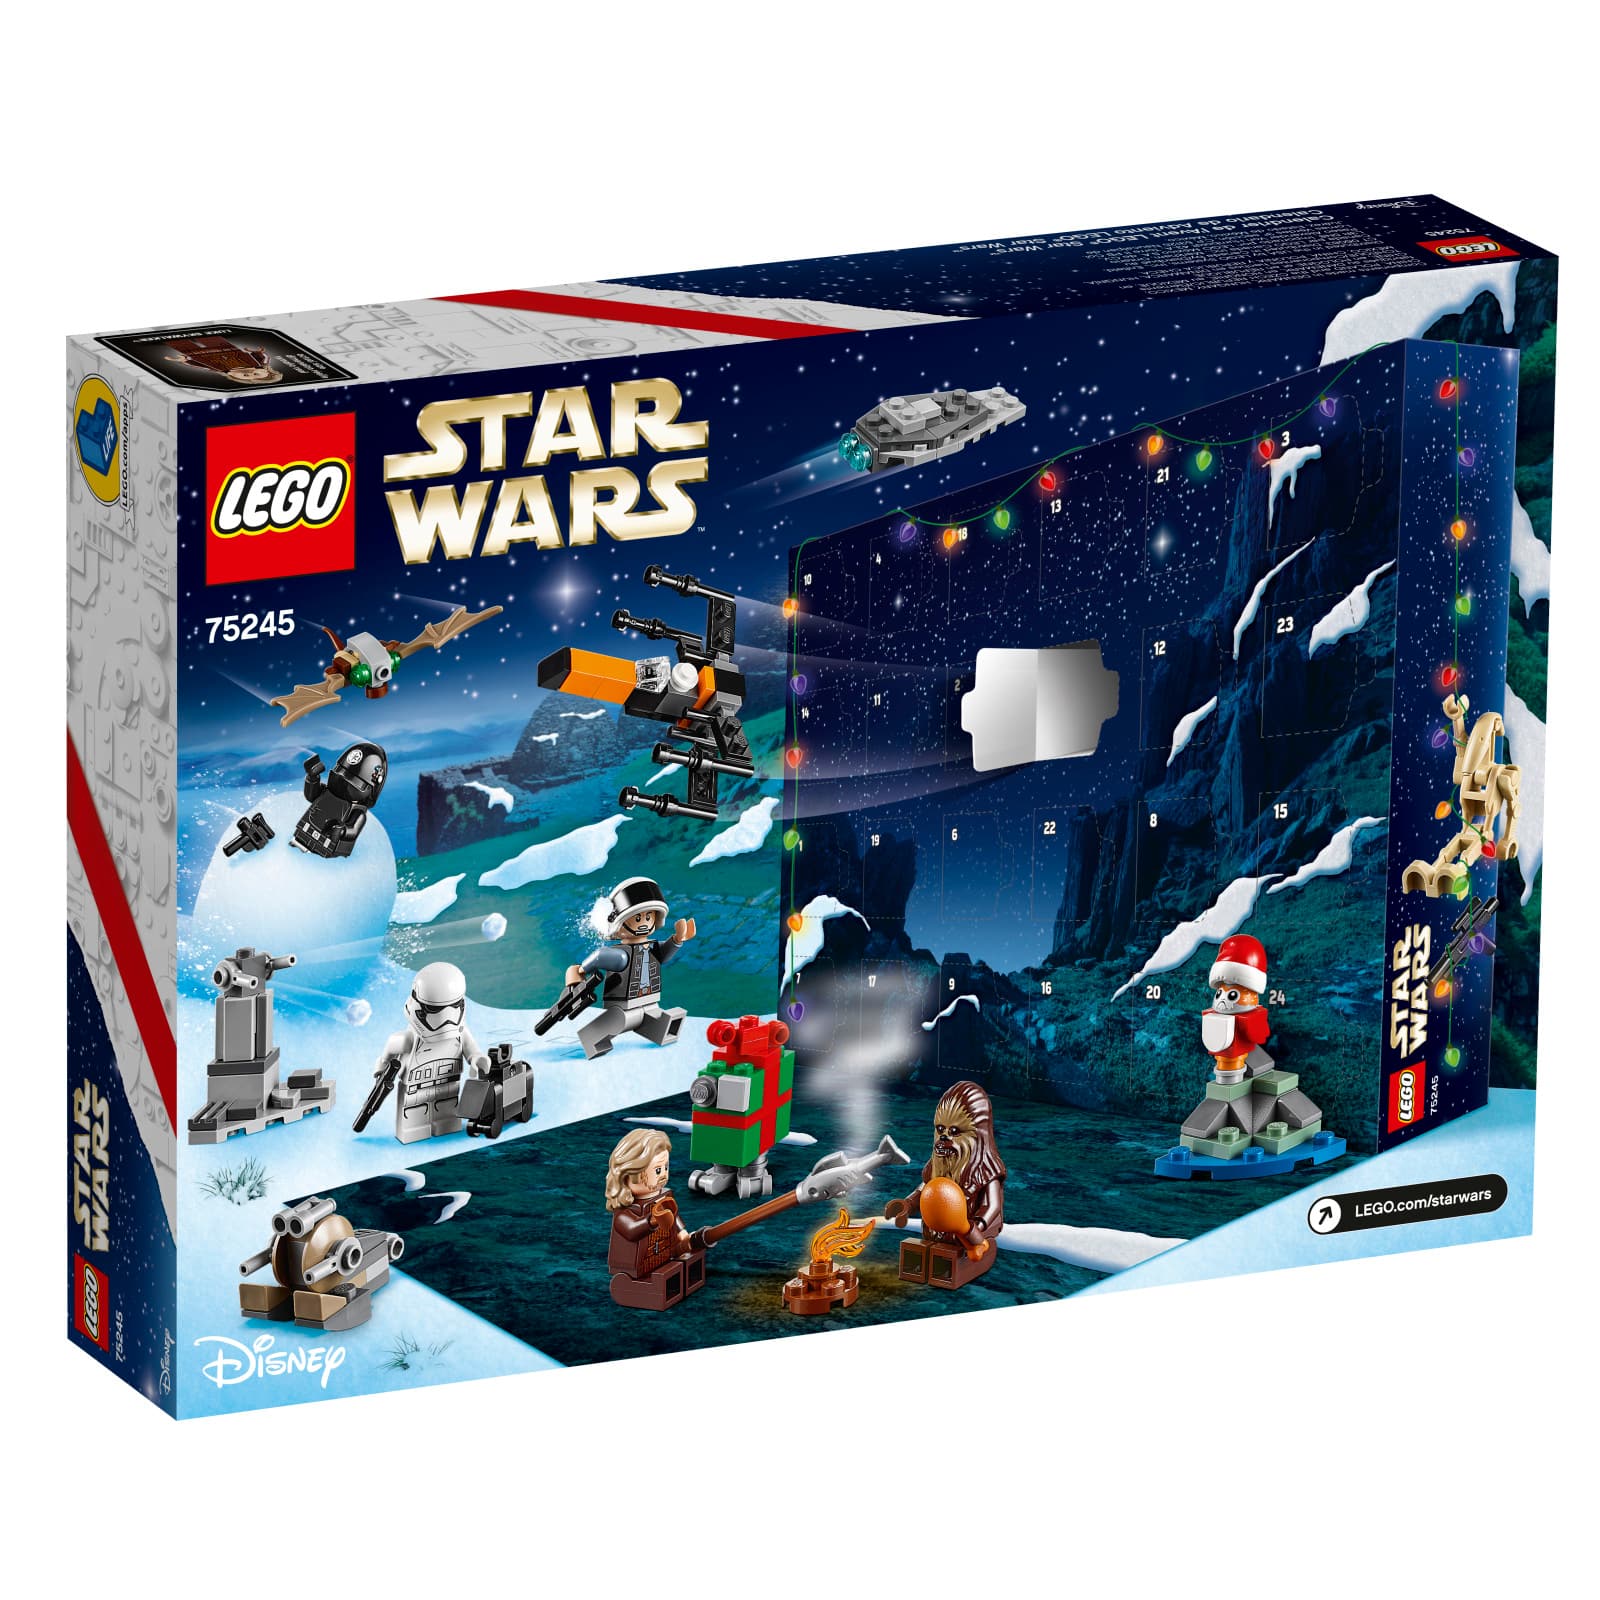 Buy the Lego® Star Wars™ Advent Calendar at Michaels